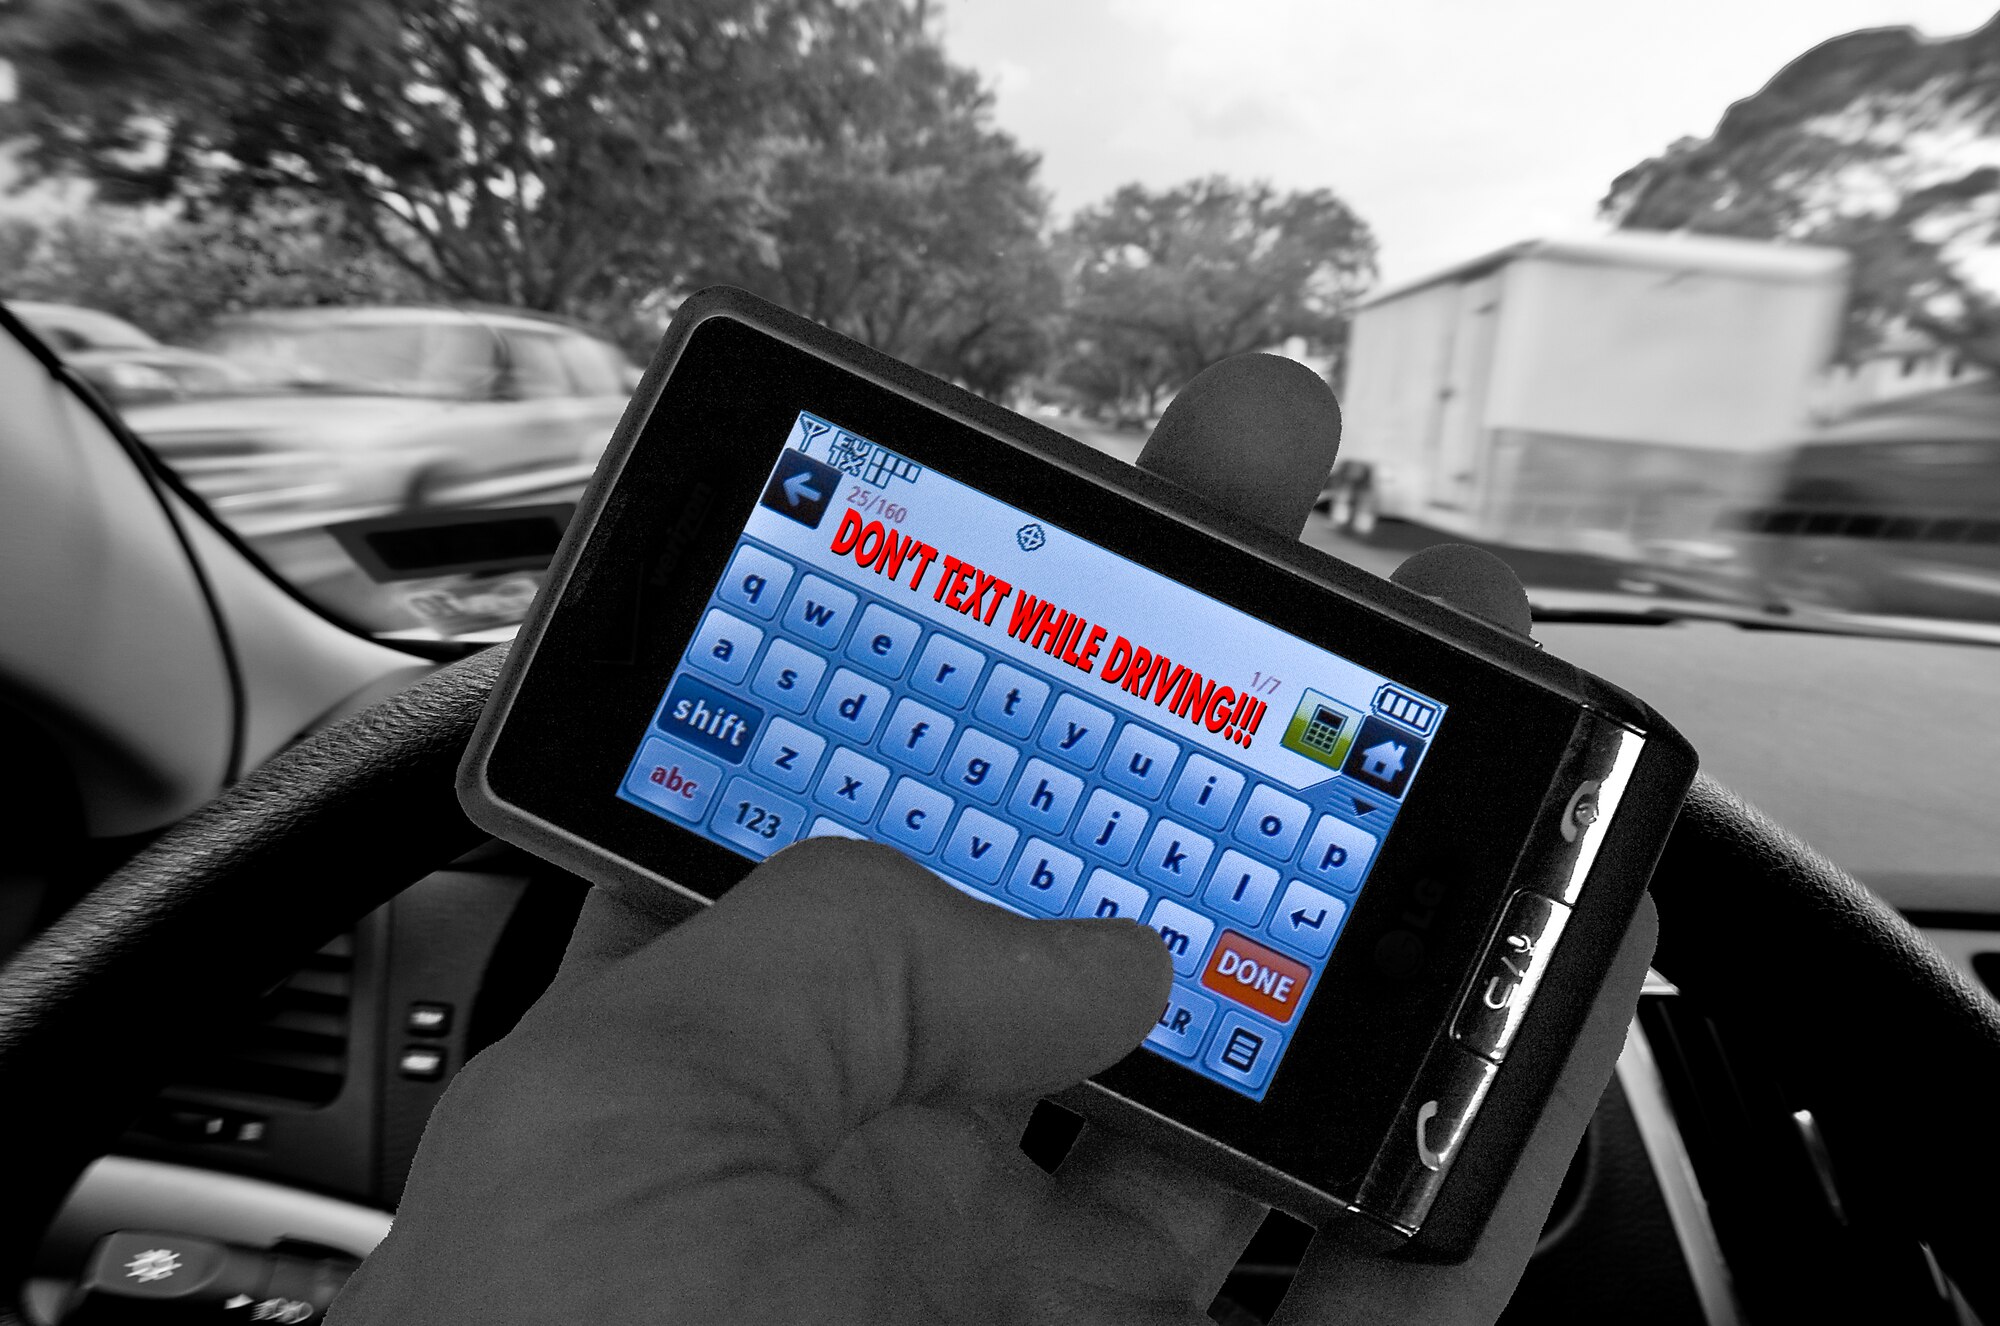 Texting while driving is quickly becoming the new "driving under the influence," according to safety experts. (photo by Tech. Sgt. Matthew Hannen)